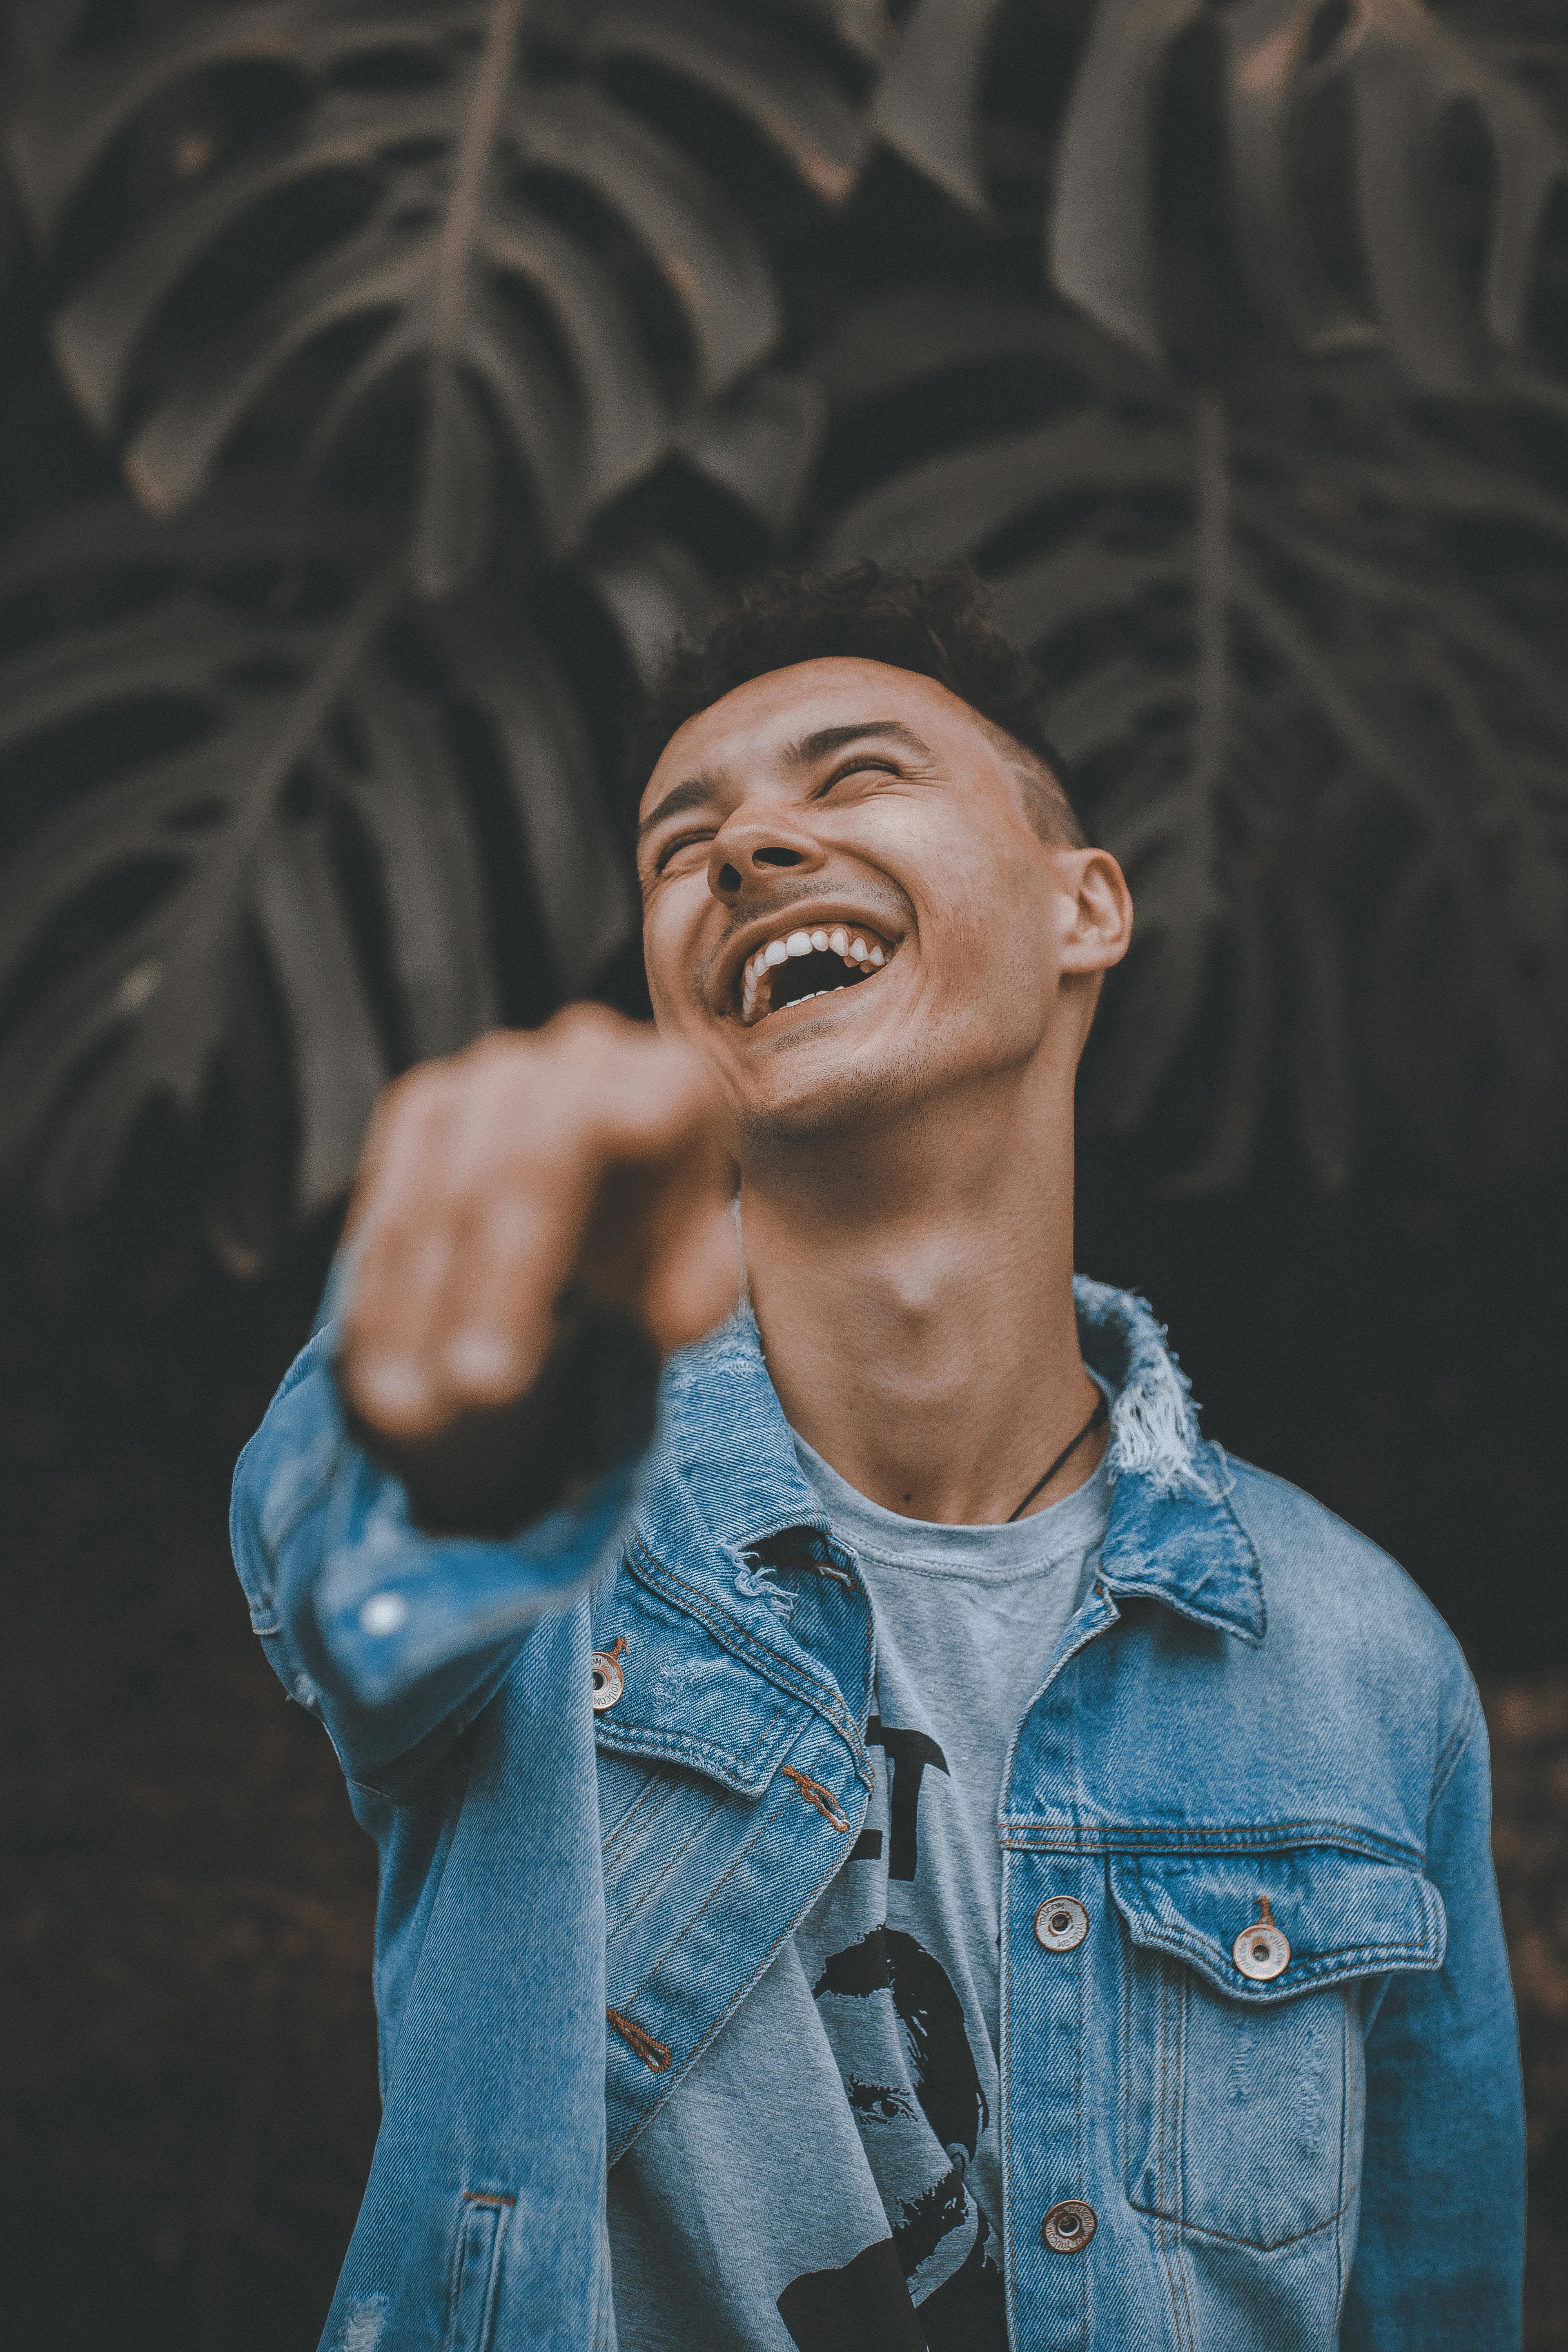 Man laughing while pointing his finger. | Photo: Pexels